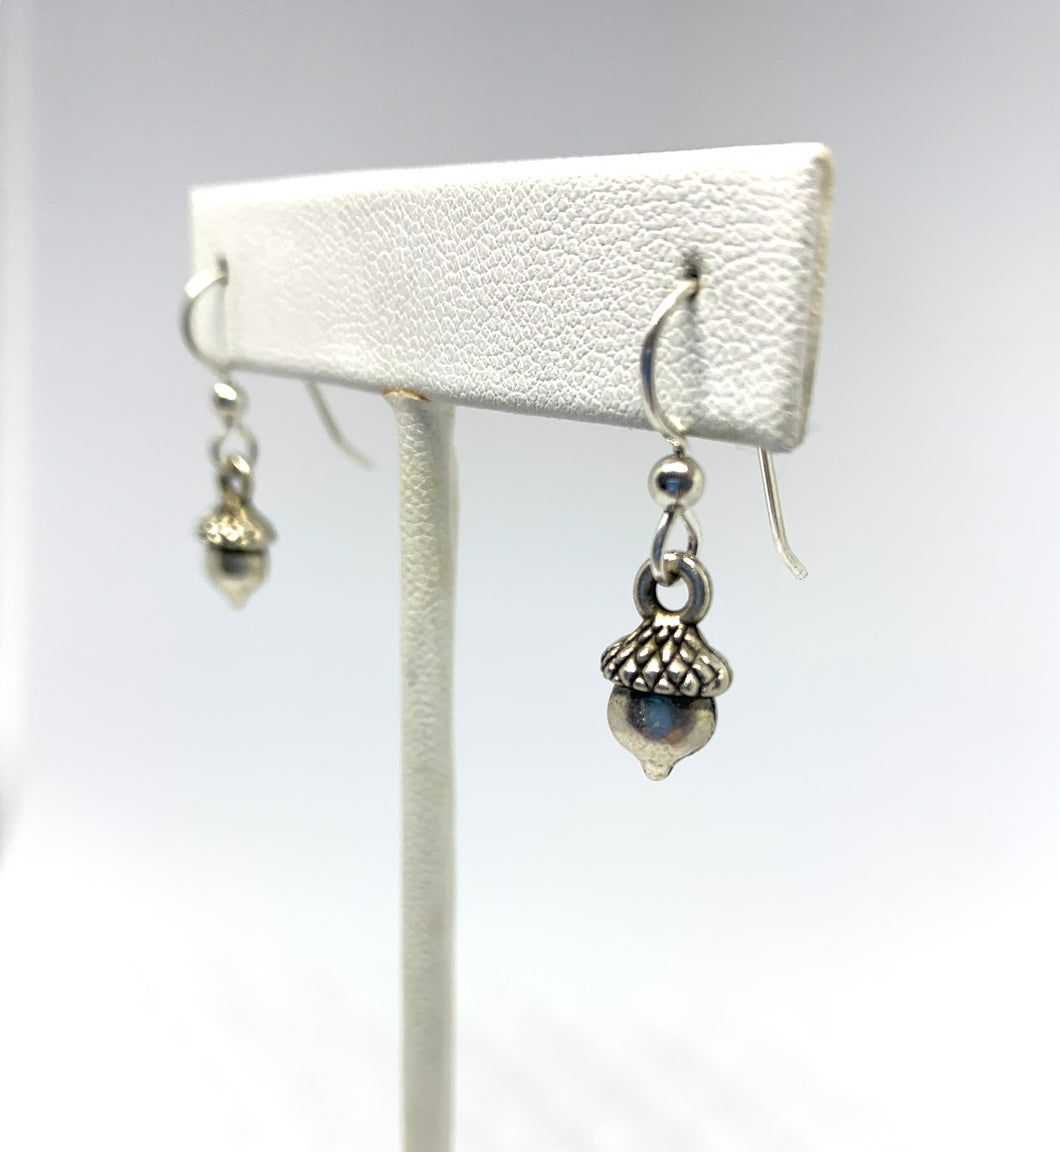 Acorn Earrings - Lively Accents